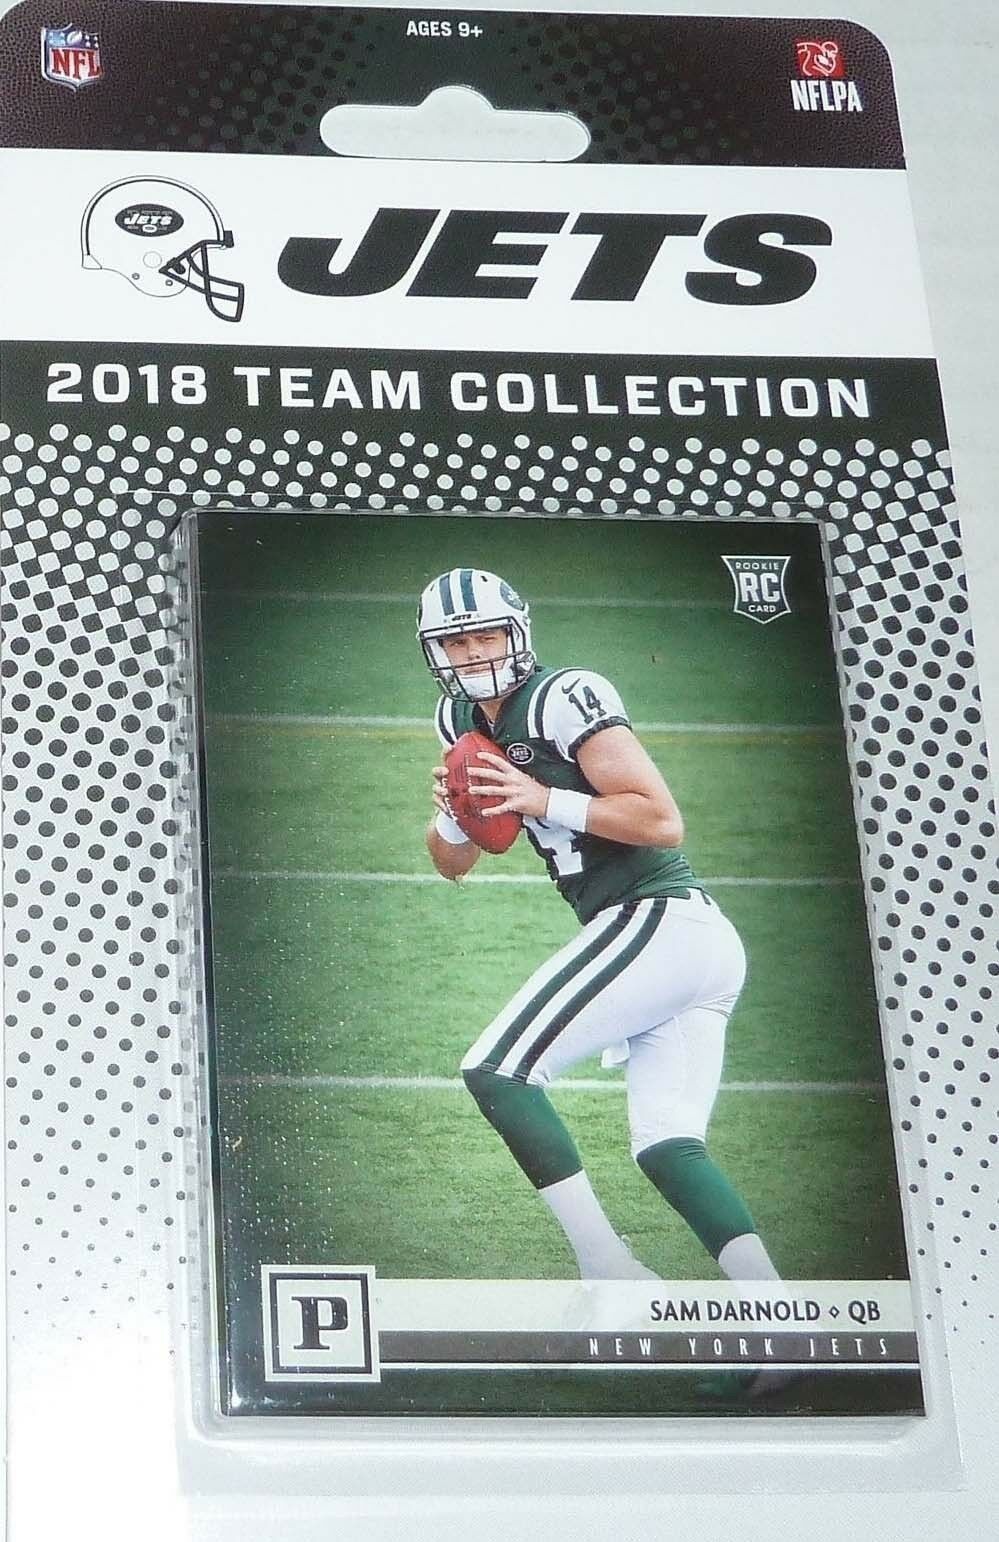 New York Jets 2018 Panini Factory Sealed Team Set Featuring Sam Darnold Rookie